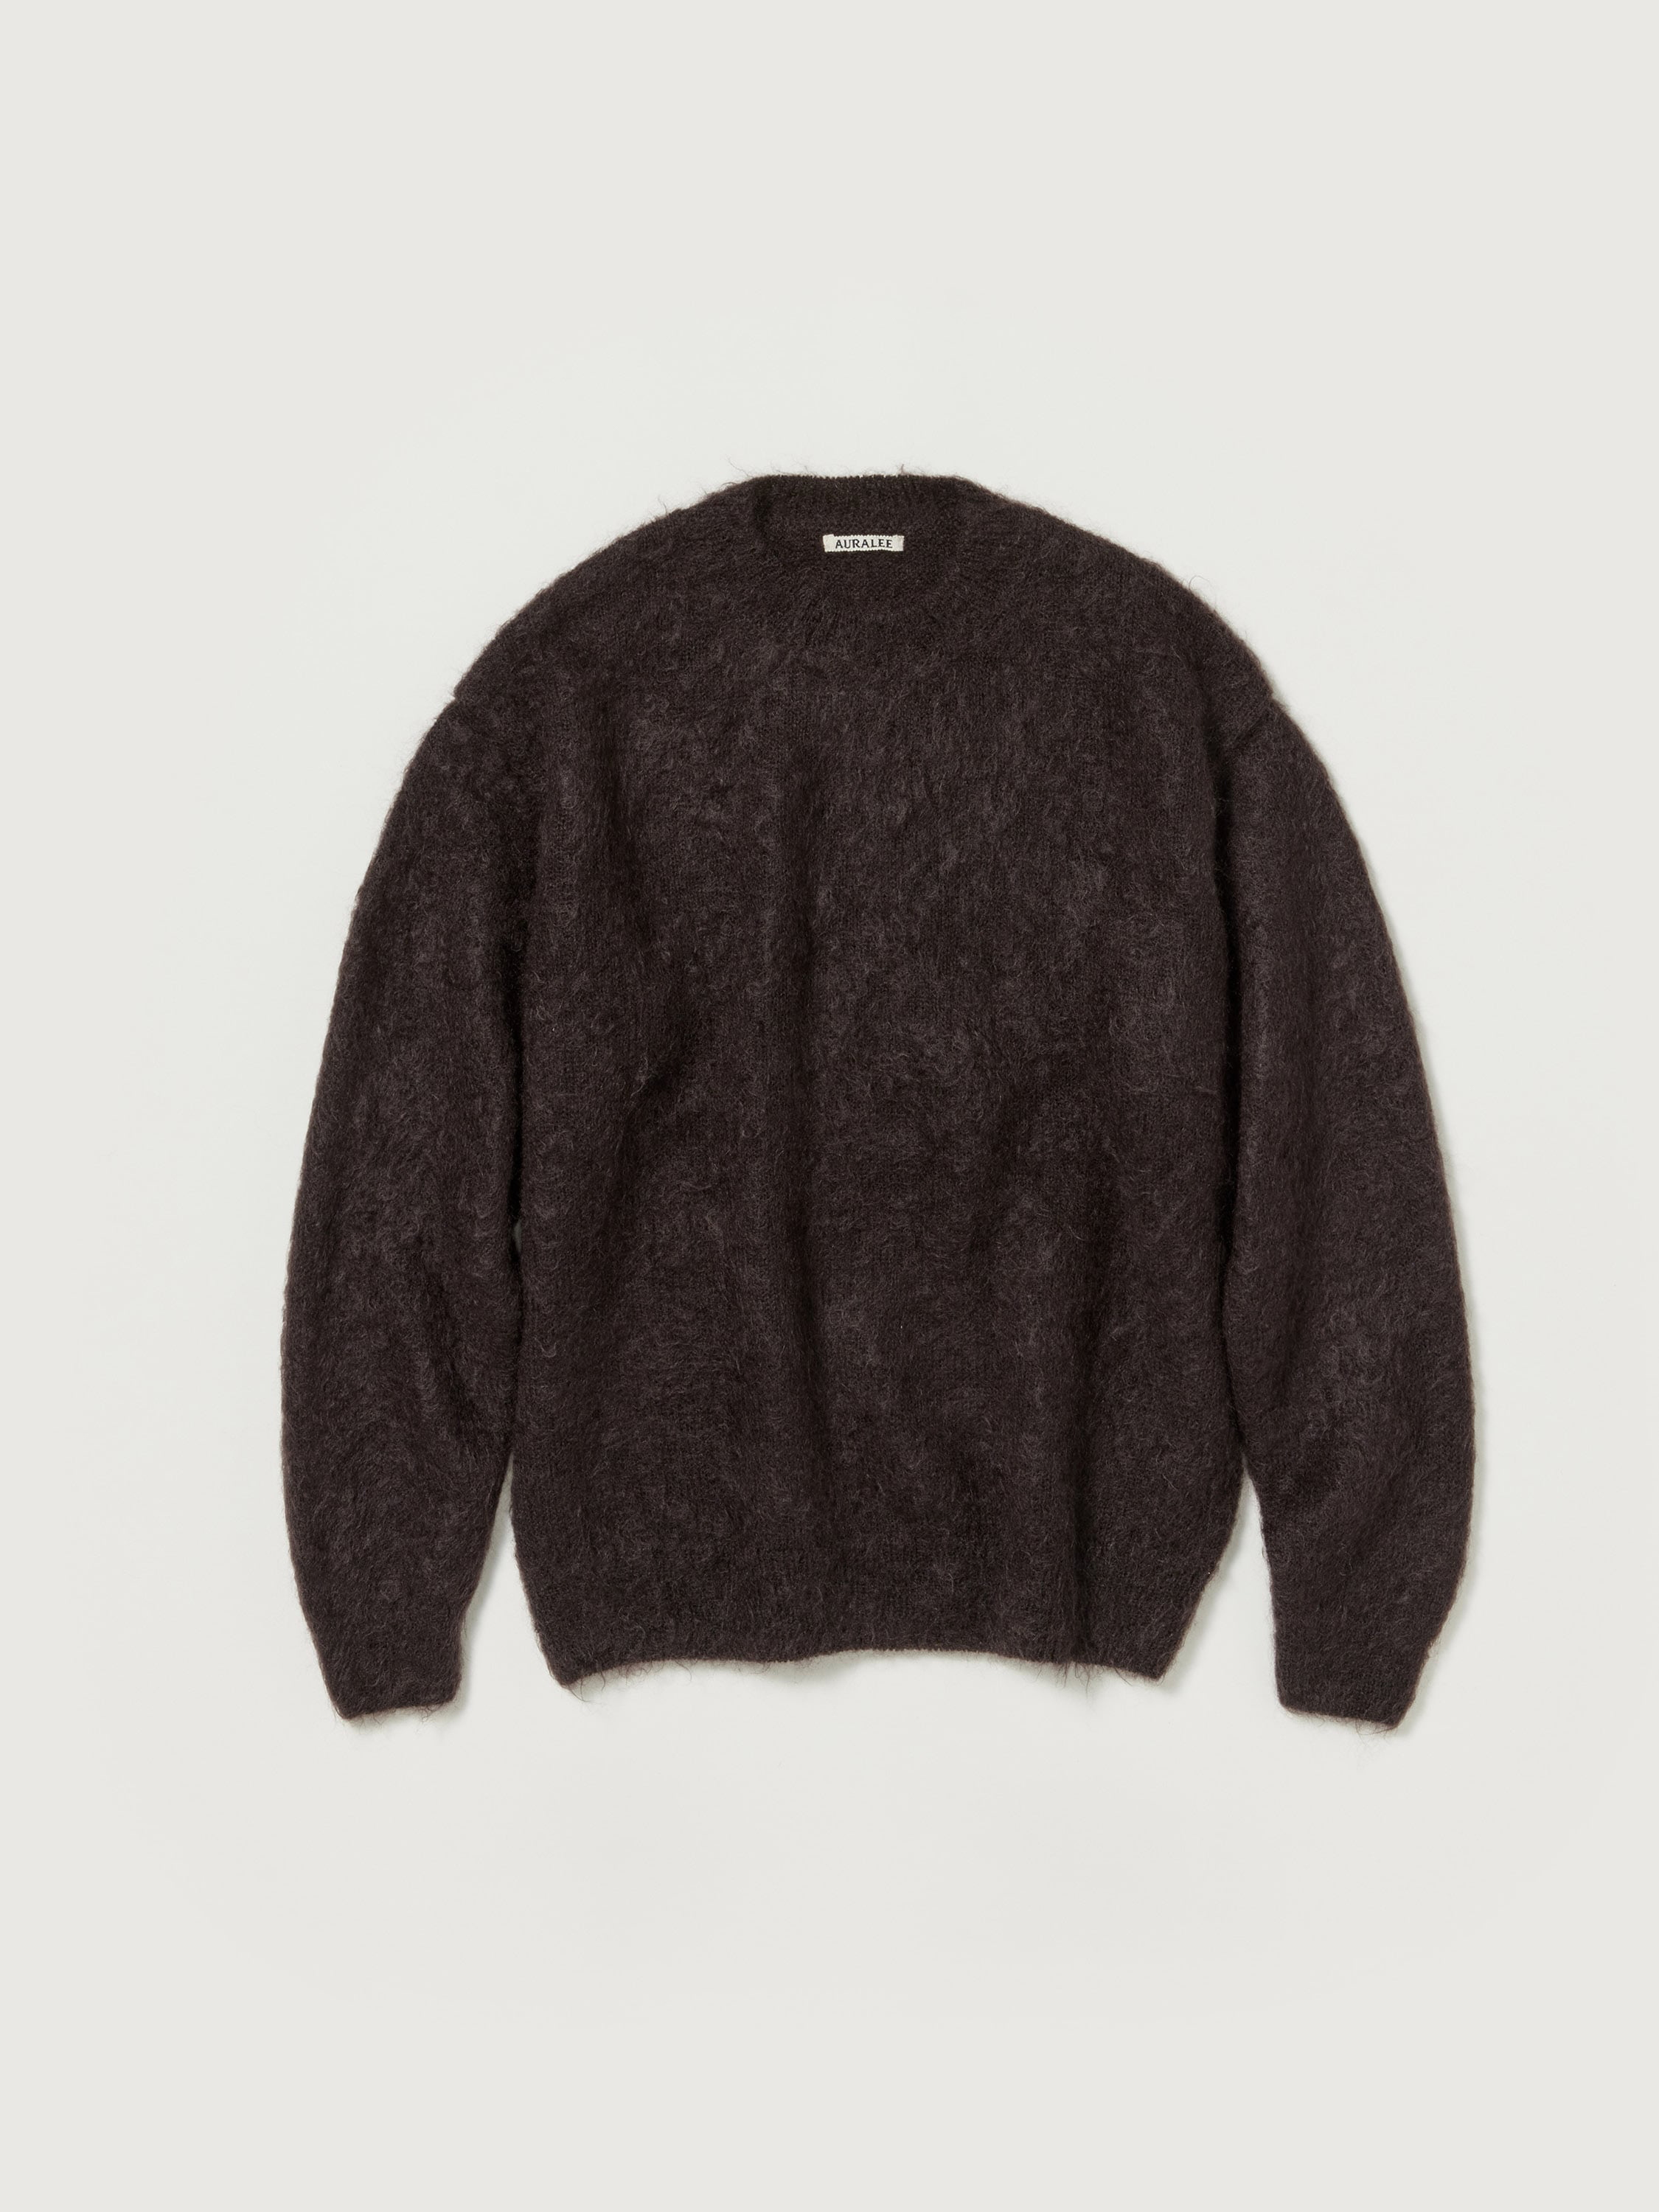 BRUSHED SUPER KID MOHAIR KNIT P/O 詳細画像 DARK BROWN 1